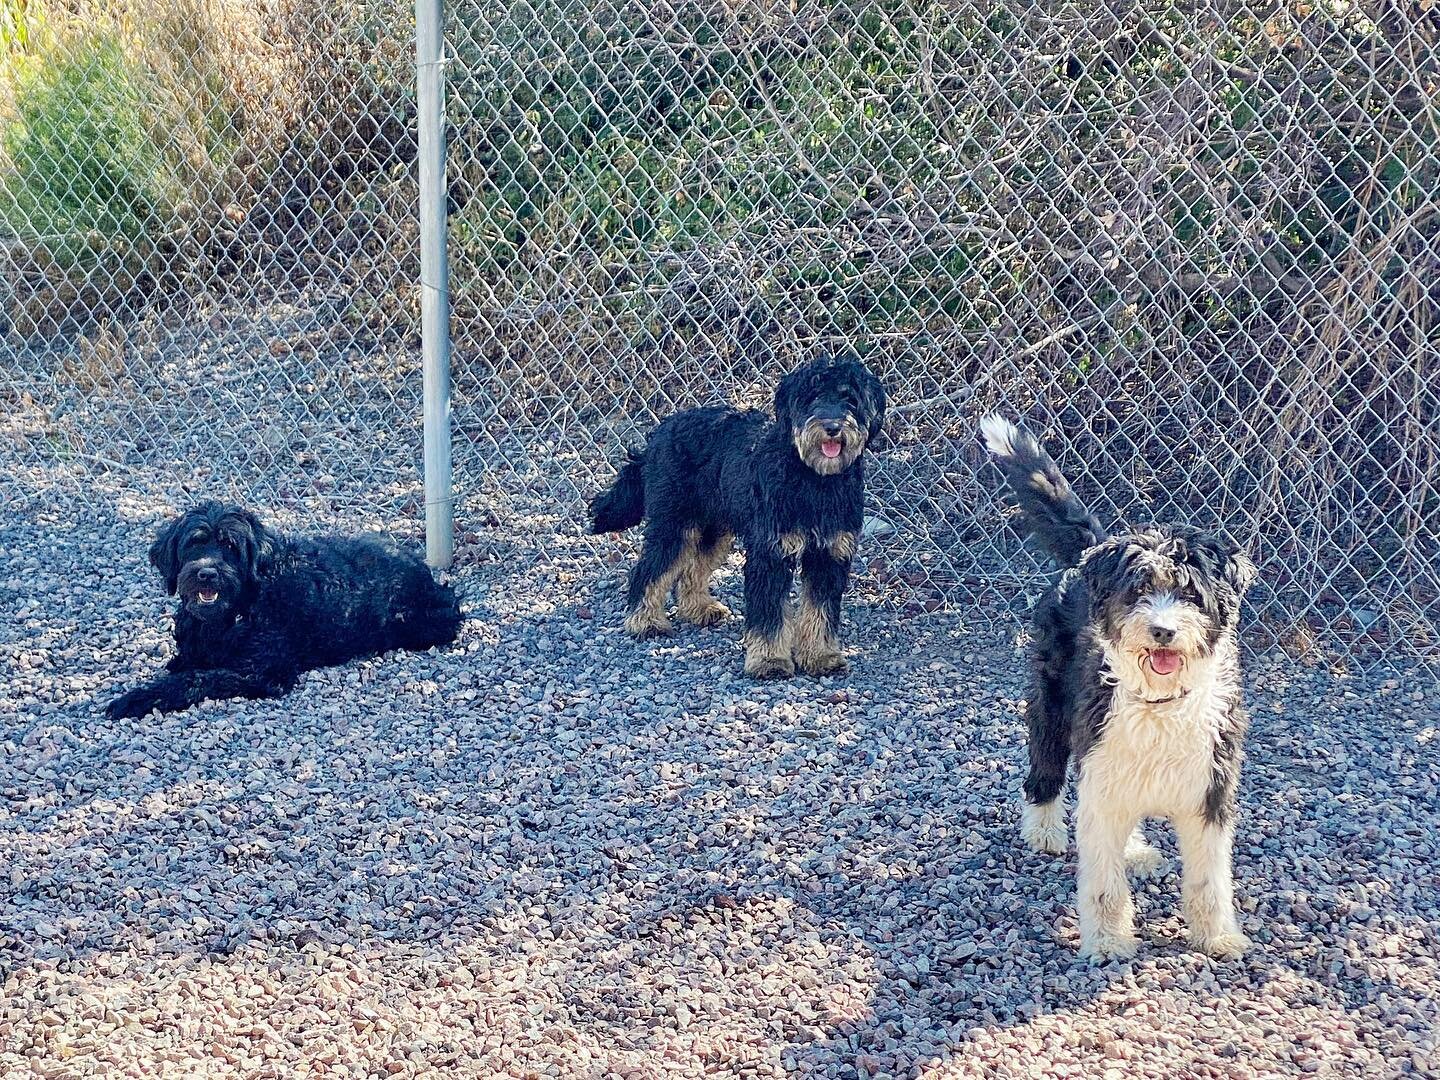 Our resident doodle squad, Sheba, Ranger, and Dakota have been with us all summer and consider us their second family. We just love them, and they have been having so much fun! 🖤

#rockymountainpetresort #doodlesofinstagram #doodlegram #dogsofsteamb